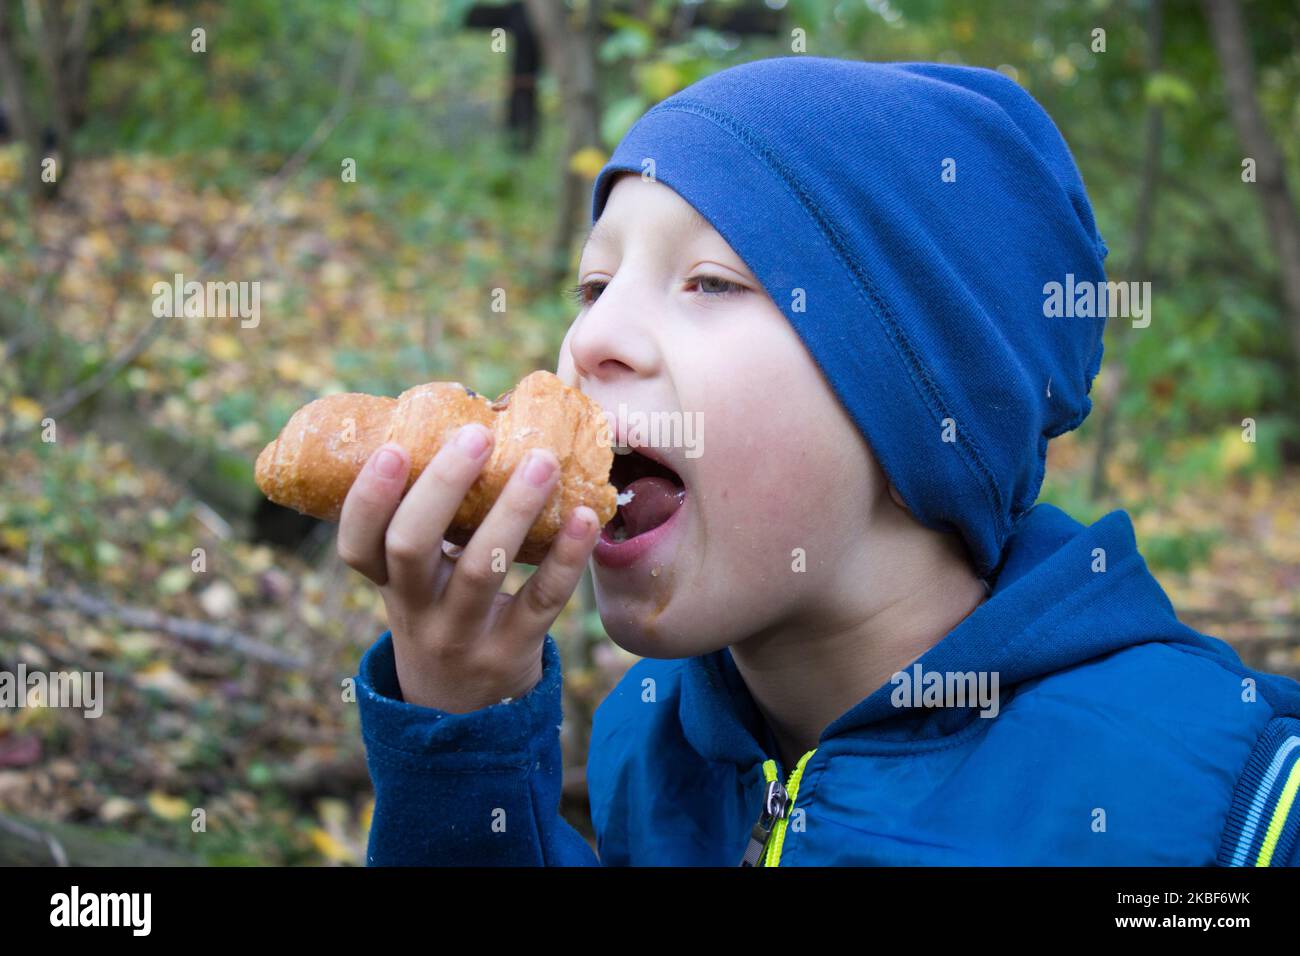 opening a mouth babe bites croissant in the park Stock Photo